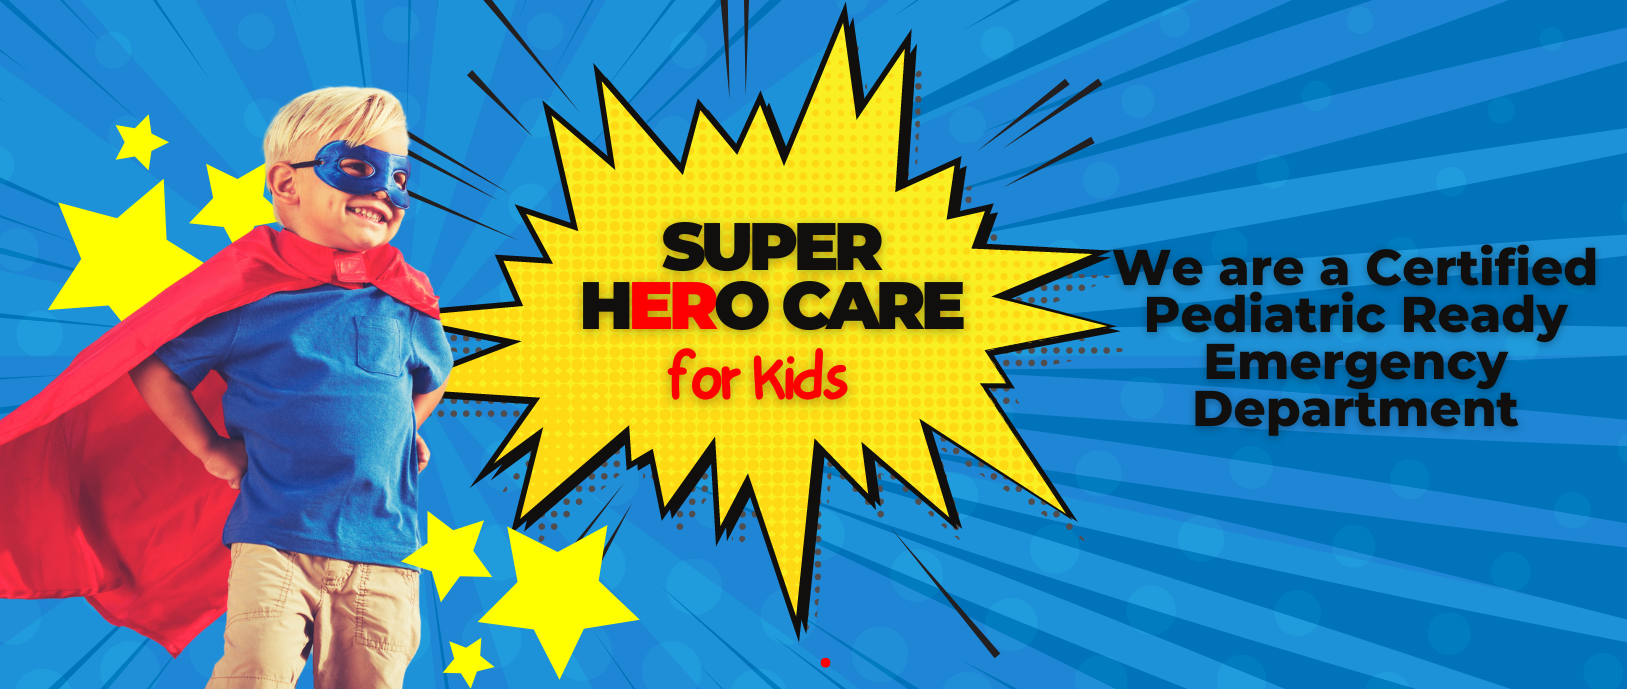 SUPER HERO CARE for kids
We are a Certified Pediatric Ready Emergency Department